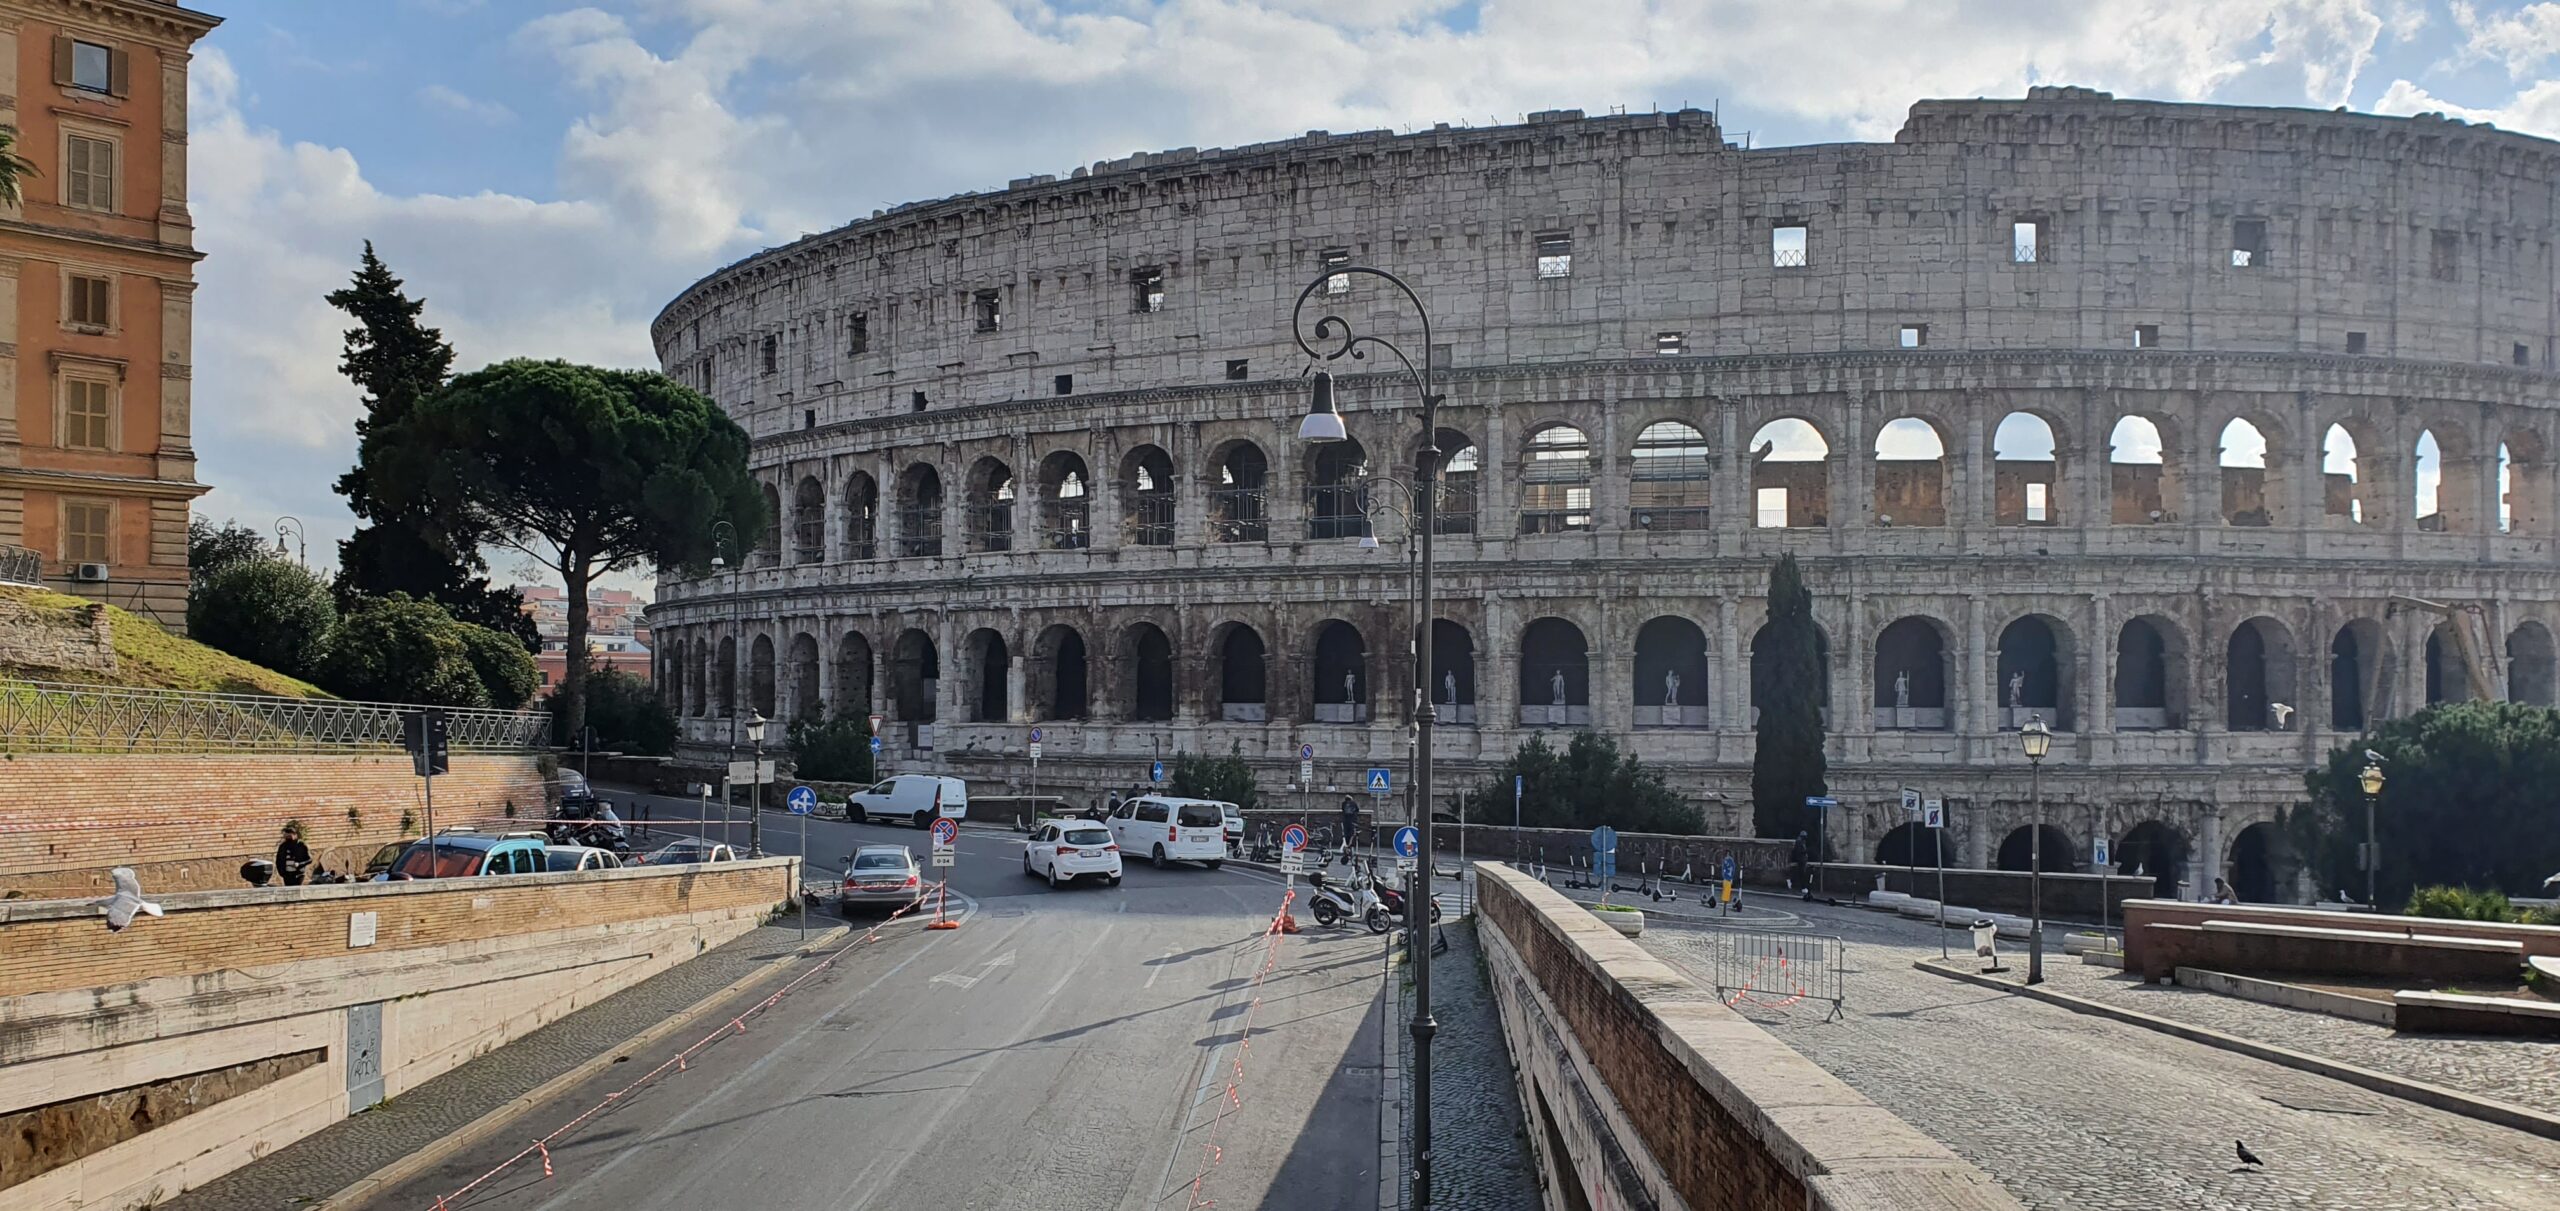 The Colosseum, view from outside